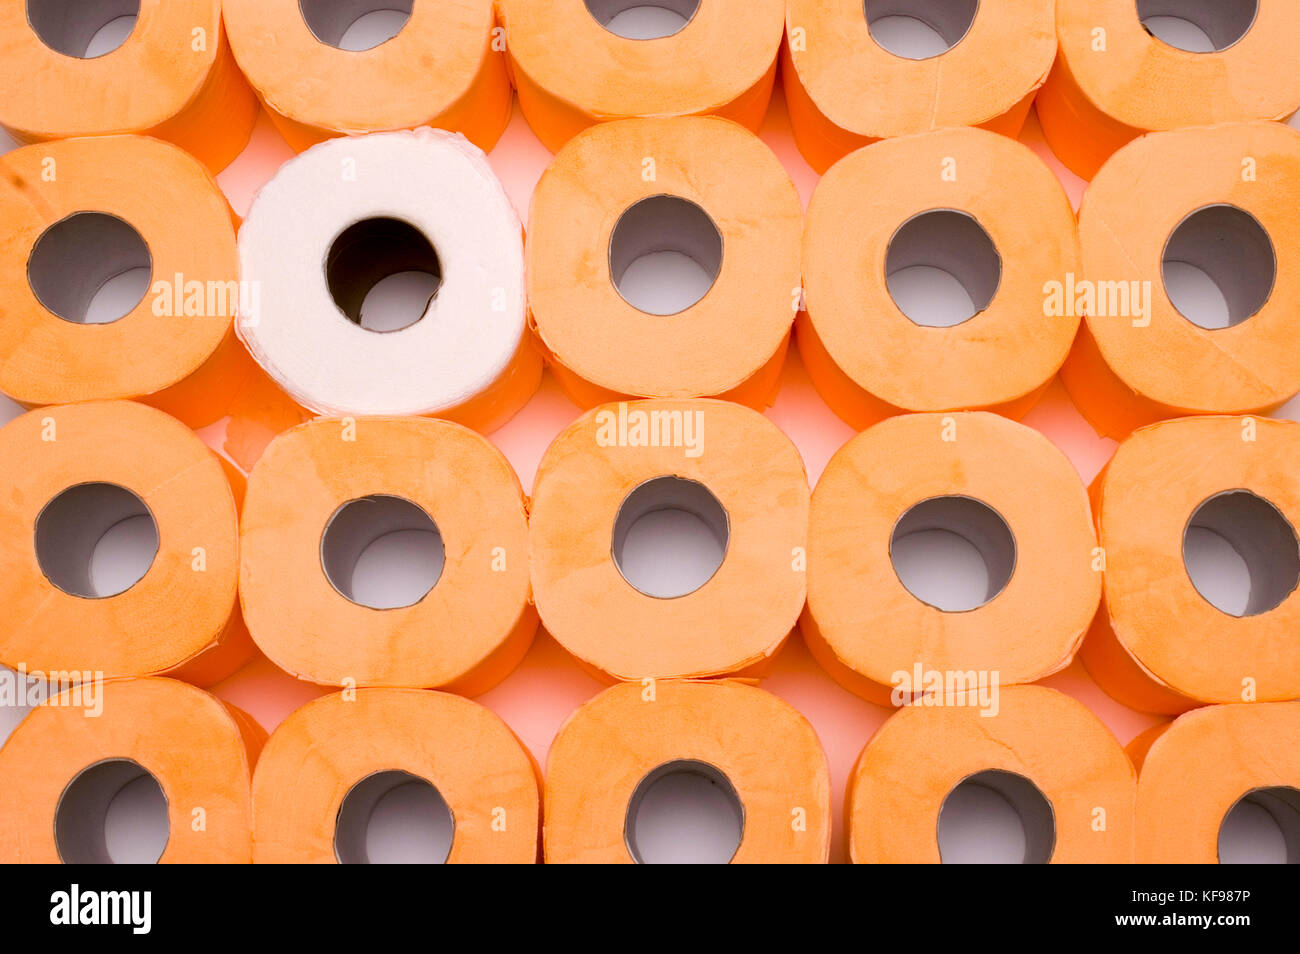 Stack Of Toilet Paper Rolls One Is Different From All Others Stock